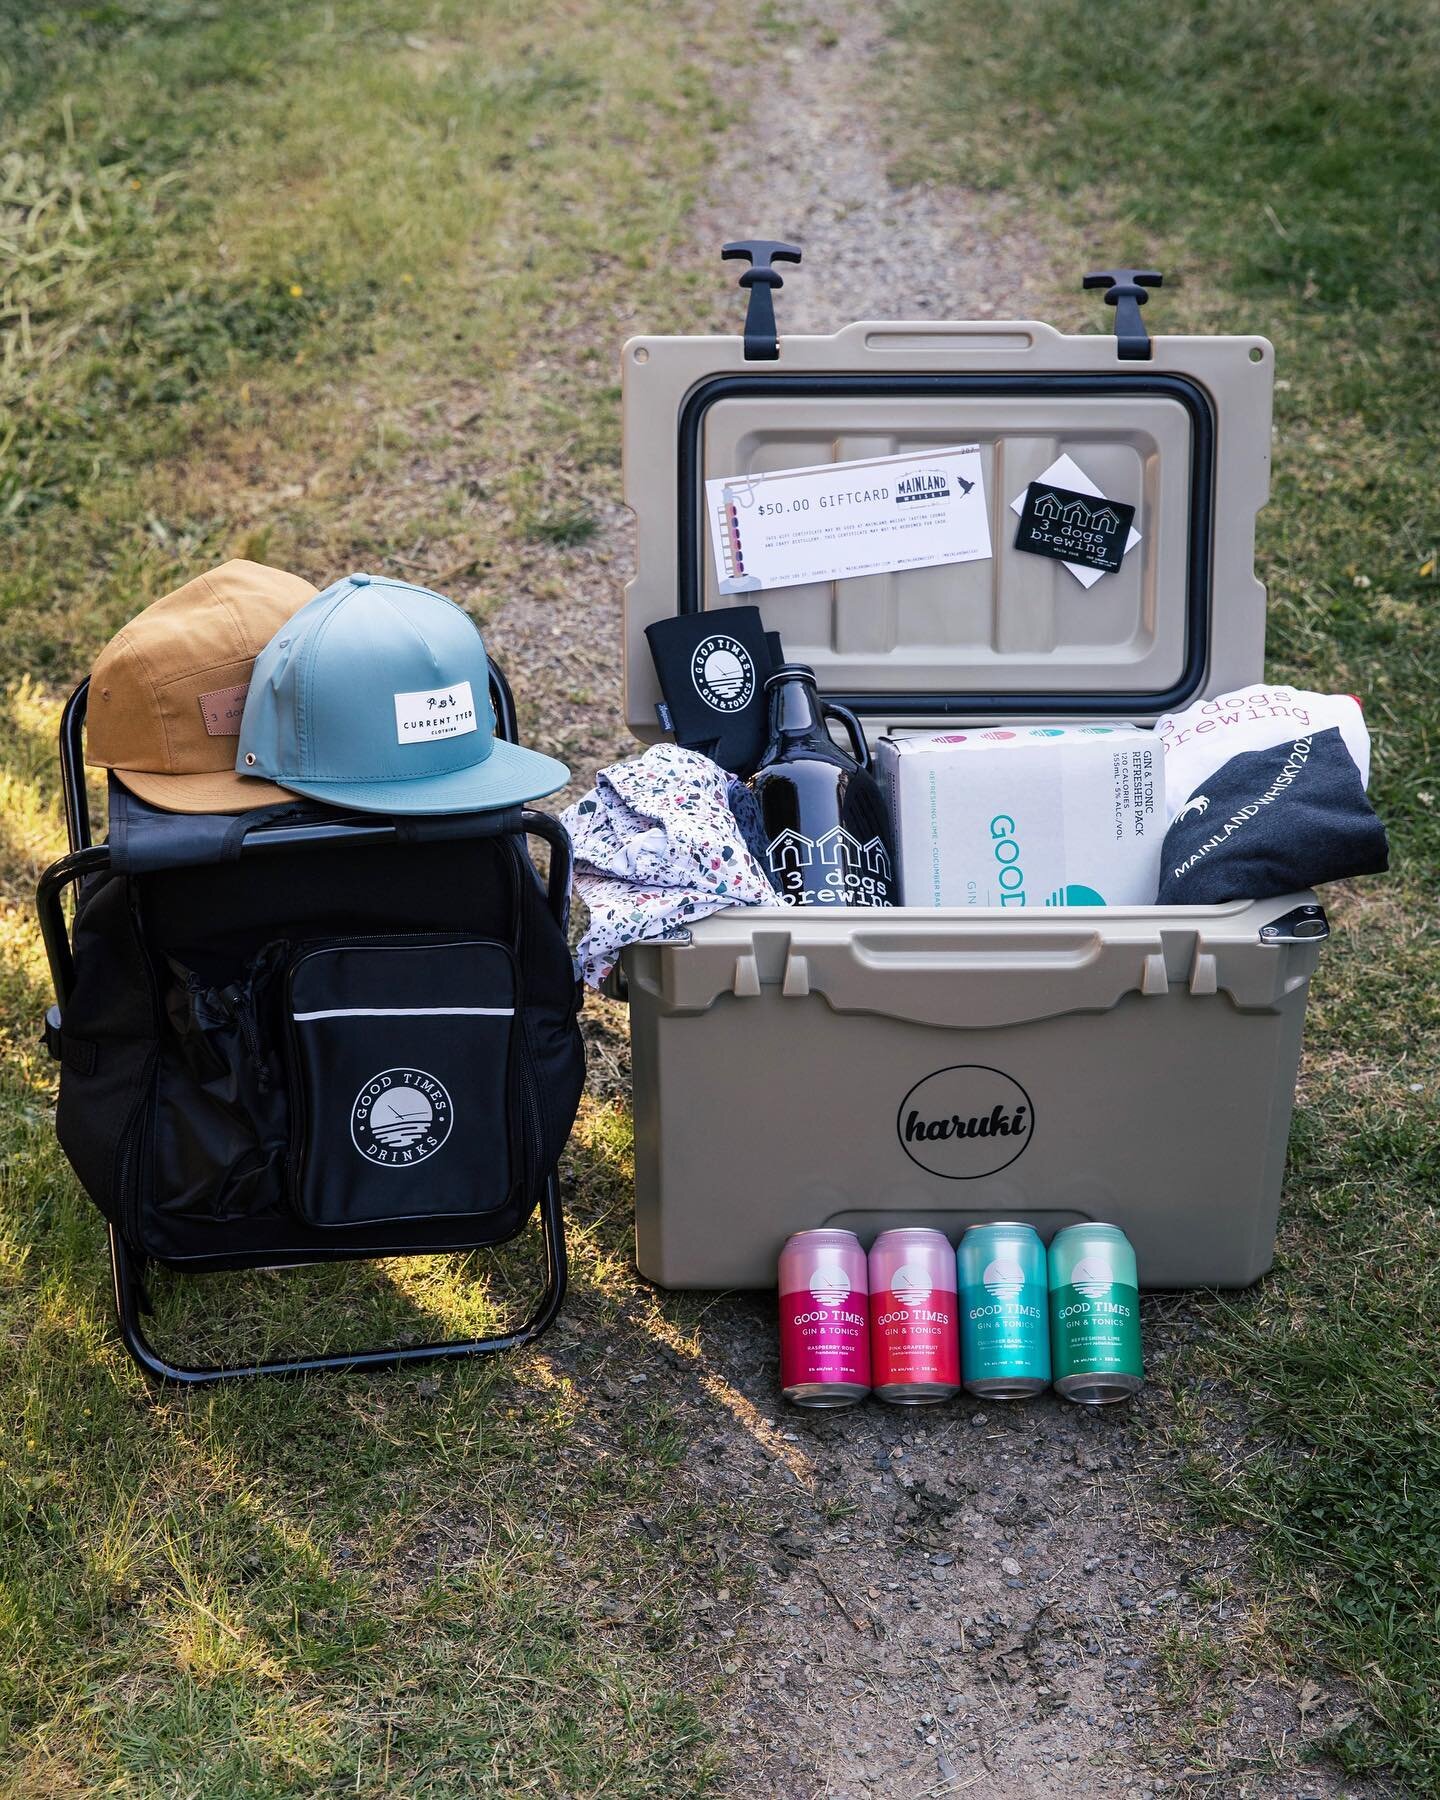 The Ultimate $750 Dad&rsquo;s Day Giveaway is here! We have everything a rad dad could ask for. Entry details below!⁣⁣⁣
⁣⁣⁣
What&rsquo;s Included?⁣⁣⁣
&bull;$200 GoodTimesDrinks Prize Pack ⁣⁣⁣
&bull;$250 @haruki_brand cooler 25qt⁣⁣⁣
&bull;$50 Gift Cer